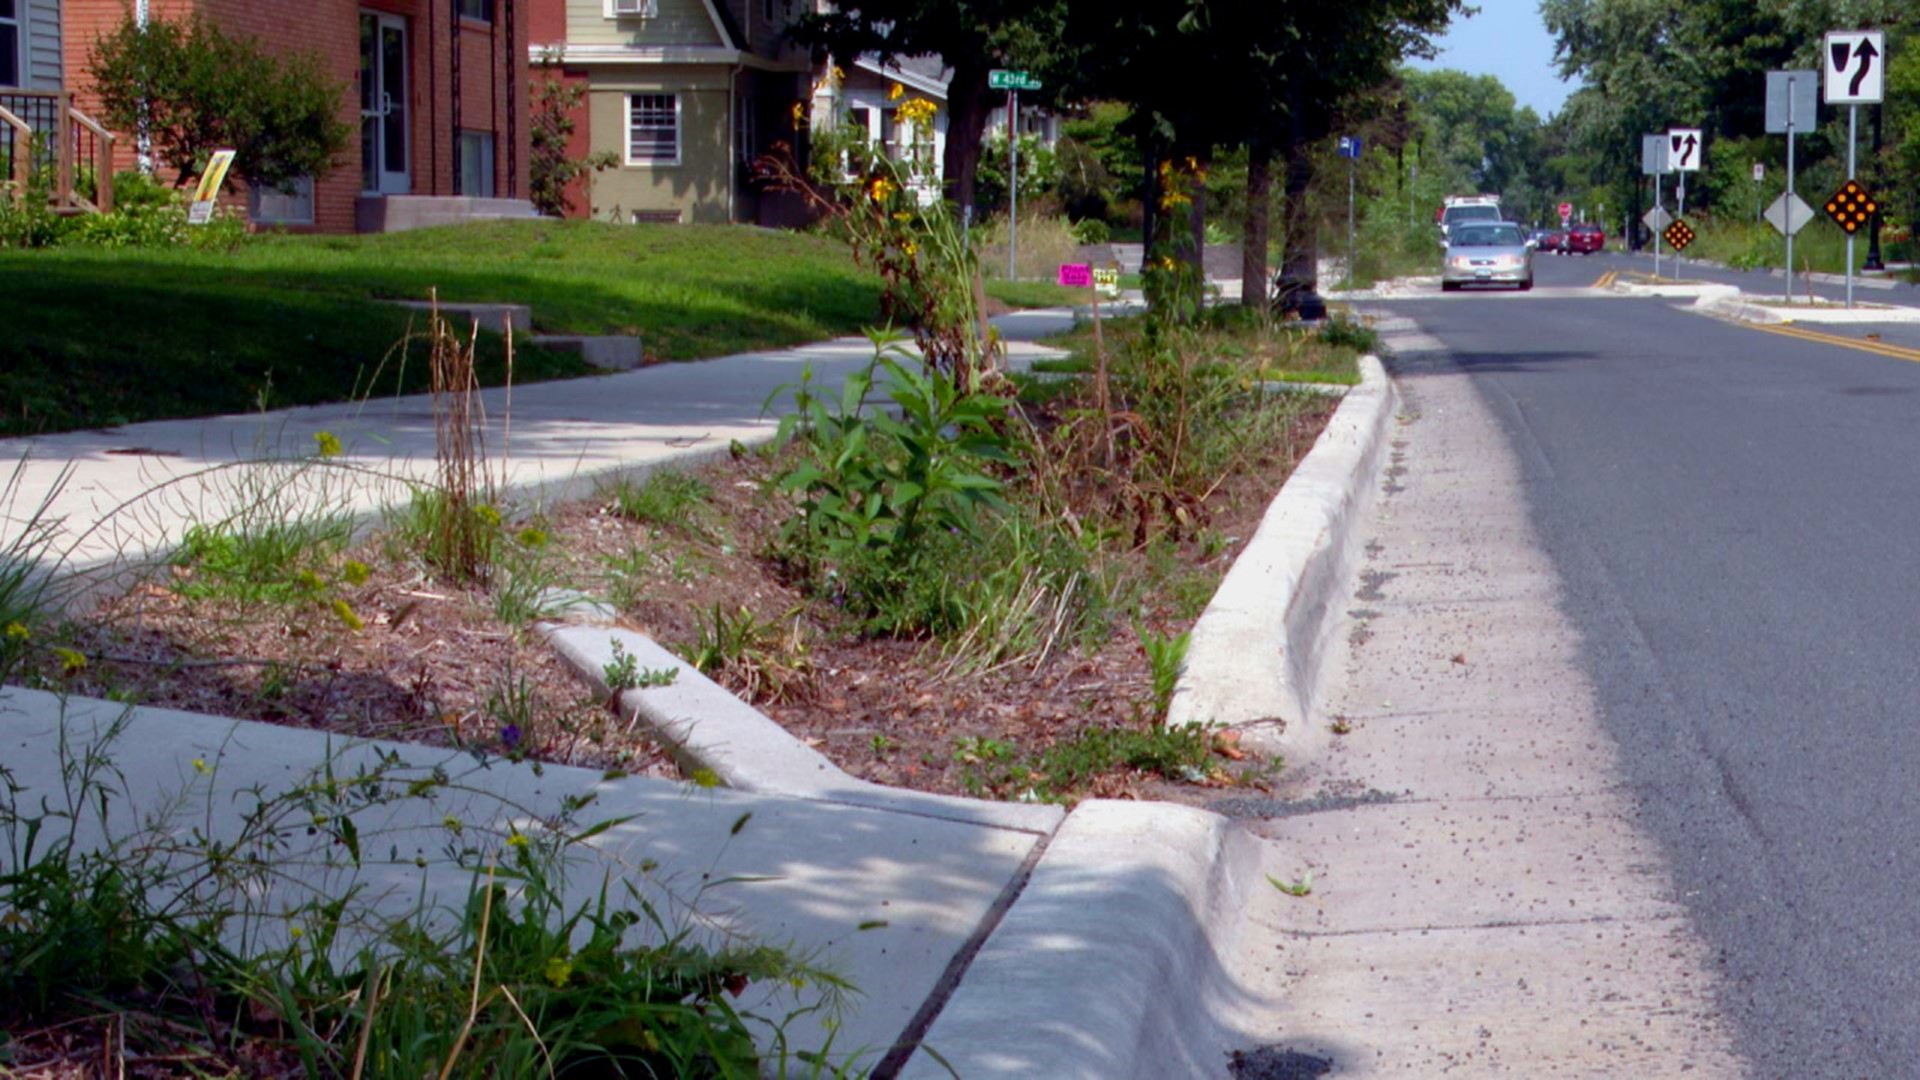 Minneapolis will restart ambitious rain garden project on a stretch of Grand Avenue in the Kingfield Neighborhood, after invasive weeks supplanted wildflowers.